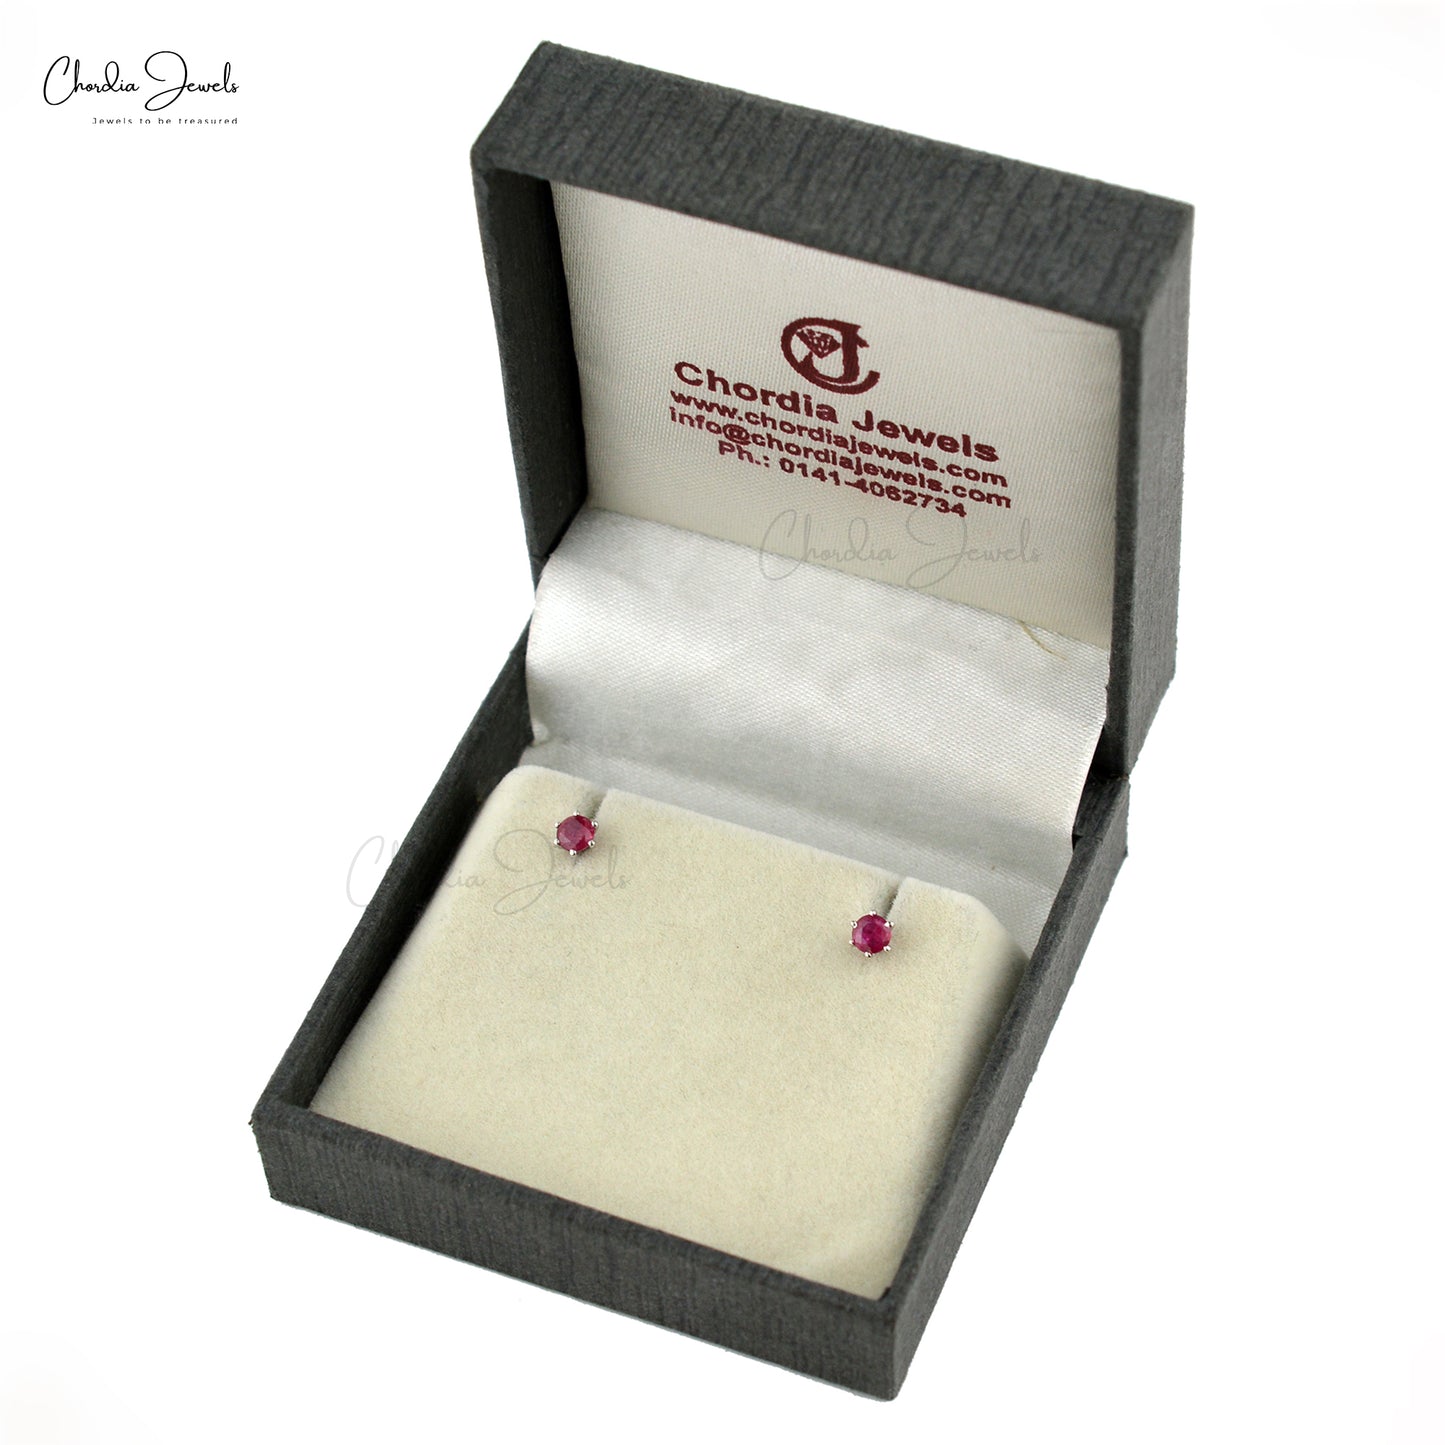 Hot Selling Jewelry Genuine Red Ruby Studs 925 Sterling Silver Round Cut Gemstone Stud Earrings At Offer Price